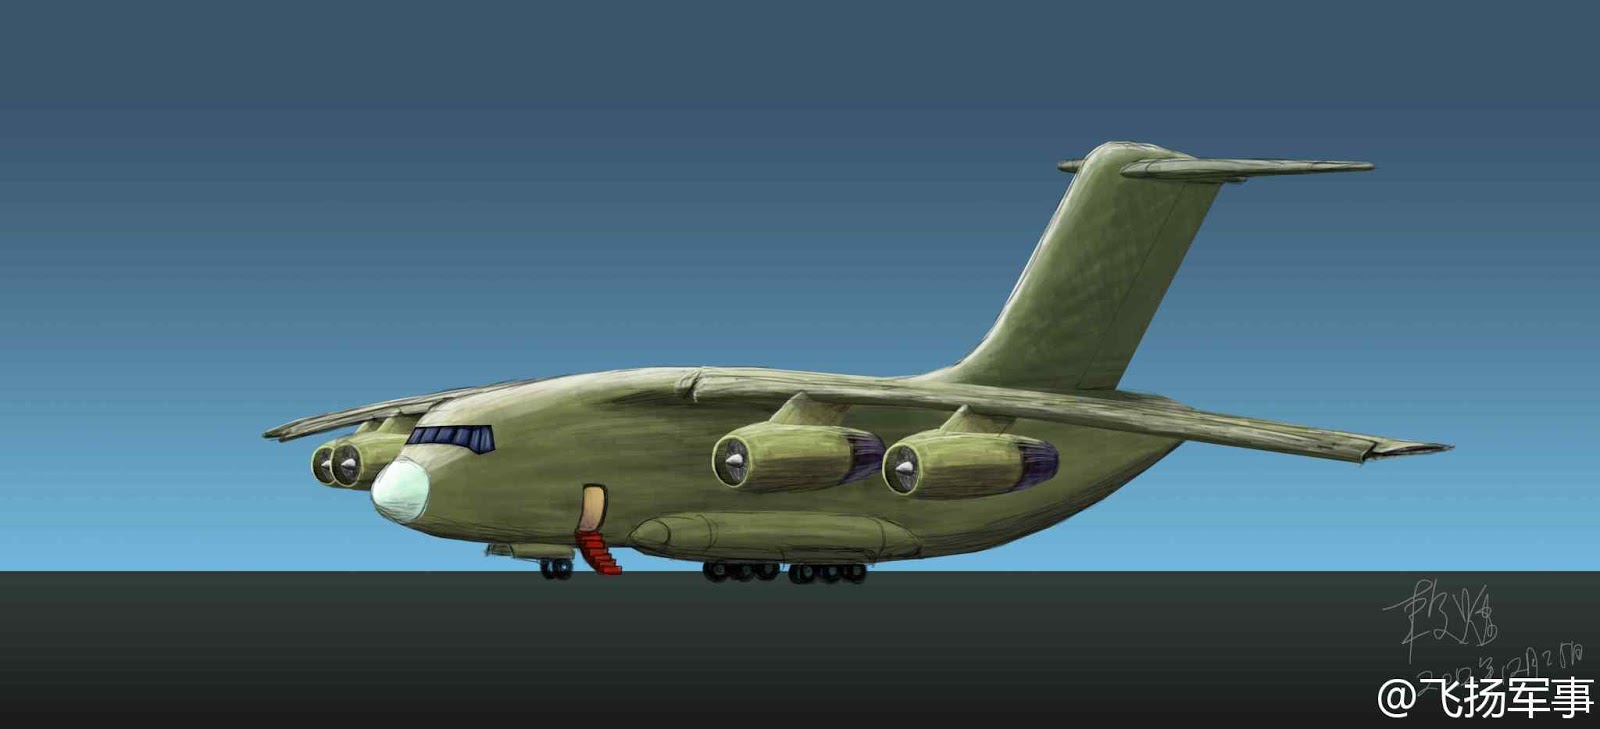  AVIC Y-20 Xian Y-20+China+Future+Military+Transport+Airplane+china+plaaf+air+force+refueling+import+flight+taxing+opertional+cgiexport+russia+il-78+73+476+engine+turbofan